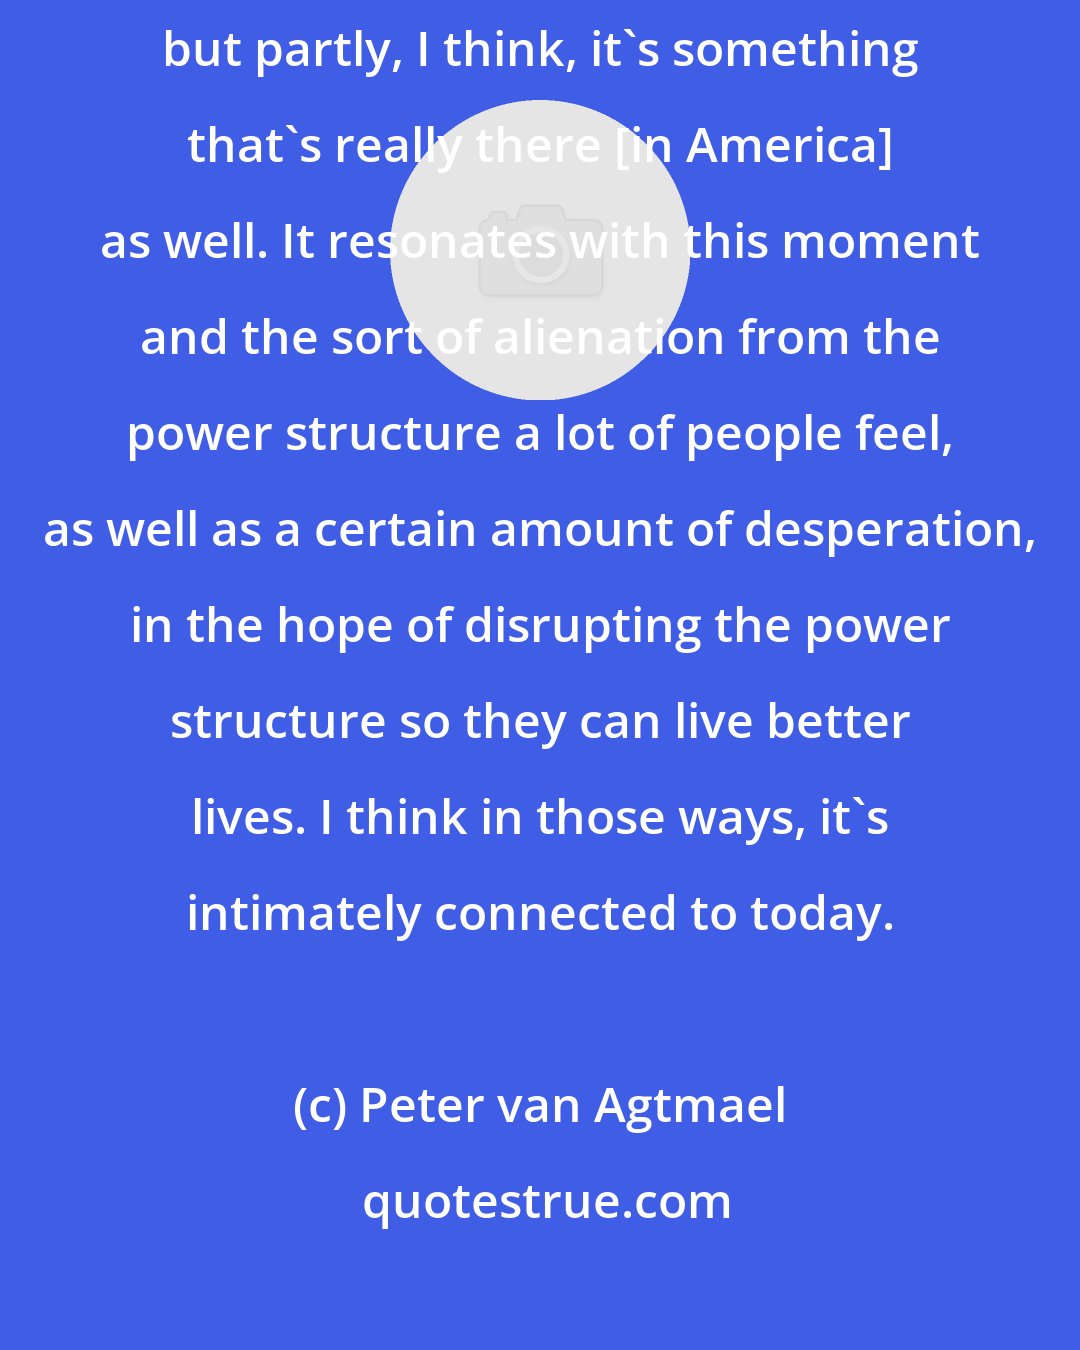 Peter van Agtmael: That kind of unease, that melancholy, is of course partly my interpretation, but partly, I think, it's something that's really there [in America] as well. It resonates with this moment and the sort of alienation from the power structure a lot of people feel, as well as a certain amount of desperation, in the hope of disrupting the power structure so they can live better lives. I think in those ways, it's intimately connected to today.